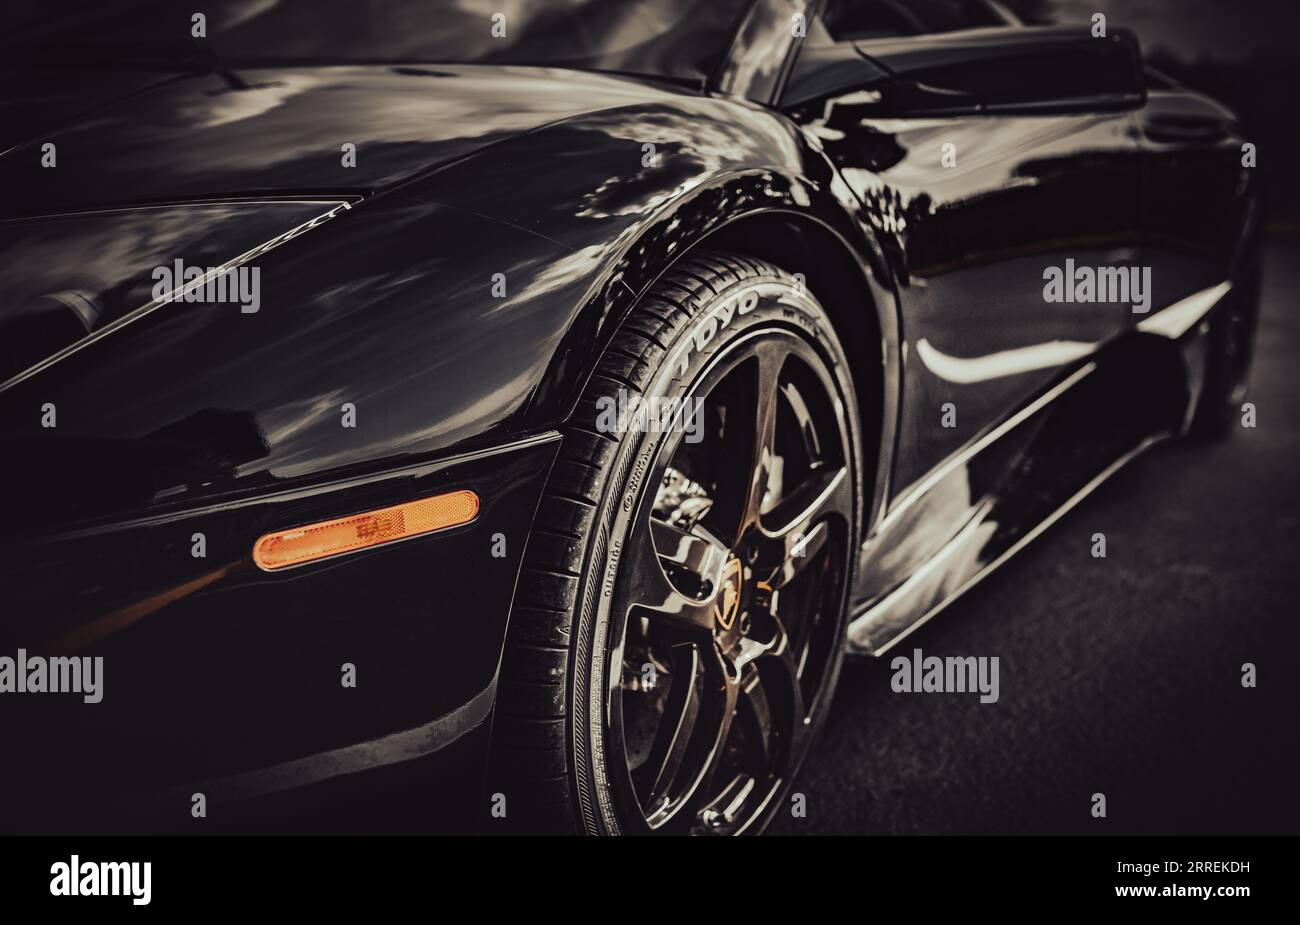 Close up black sport car Lamborghini on the street. View of Lamborghini supercar. Black Lamborghini parked on a street in Vancouver Canada-September 7 Stock Photo